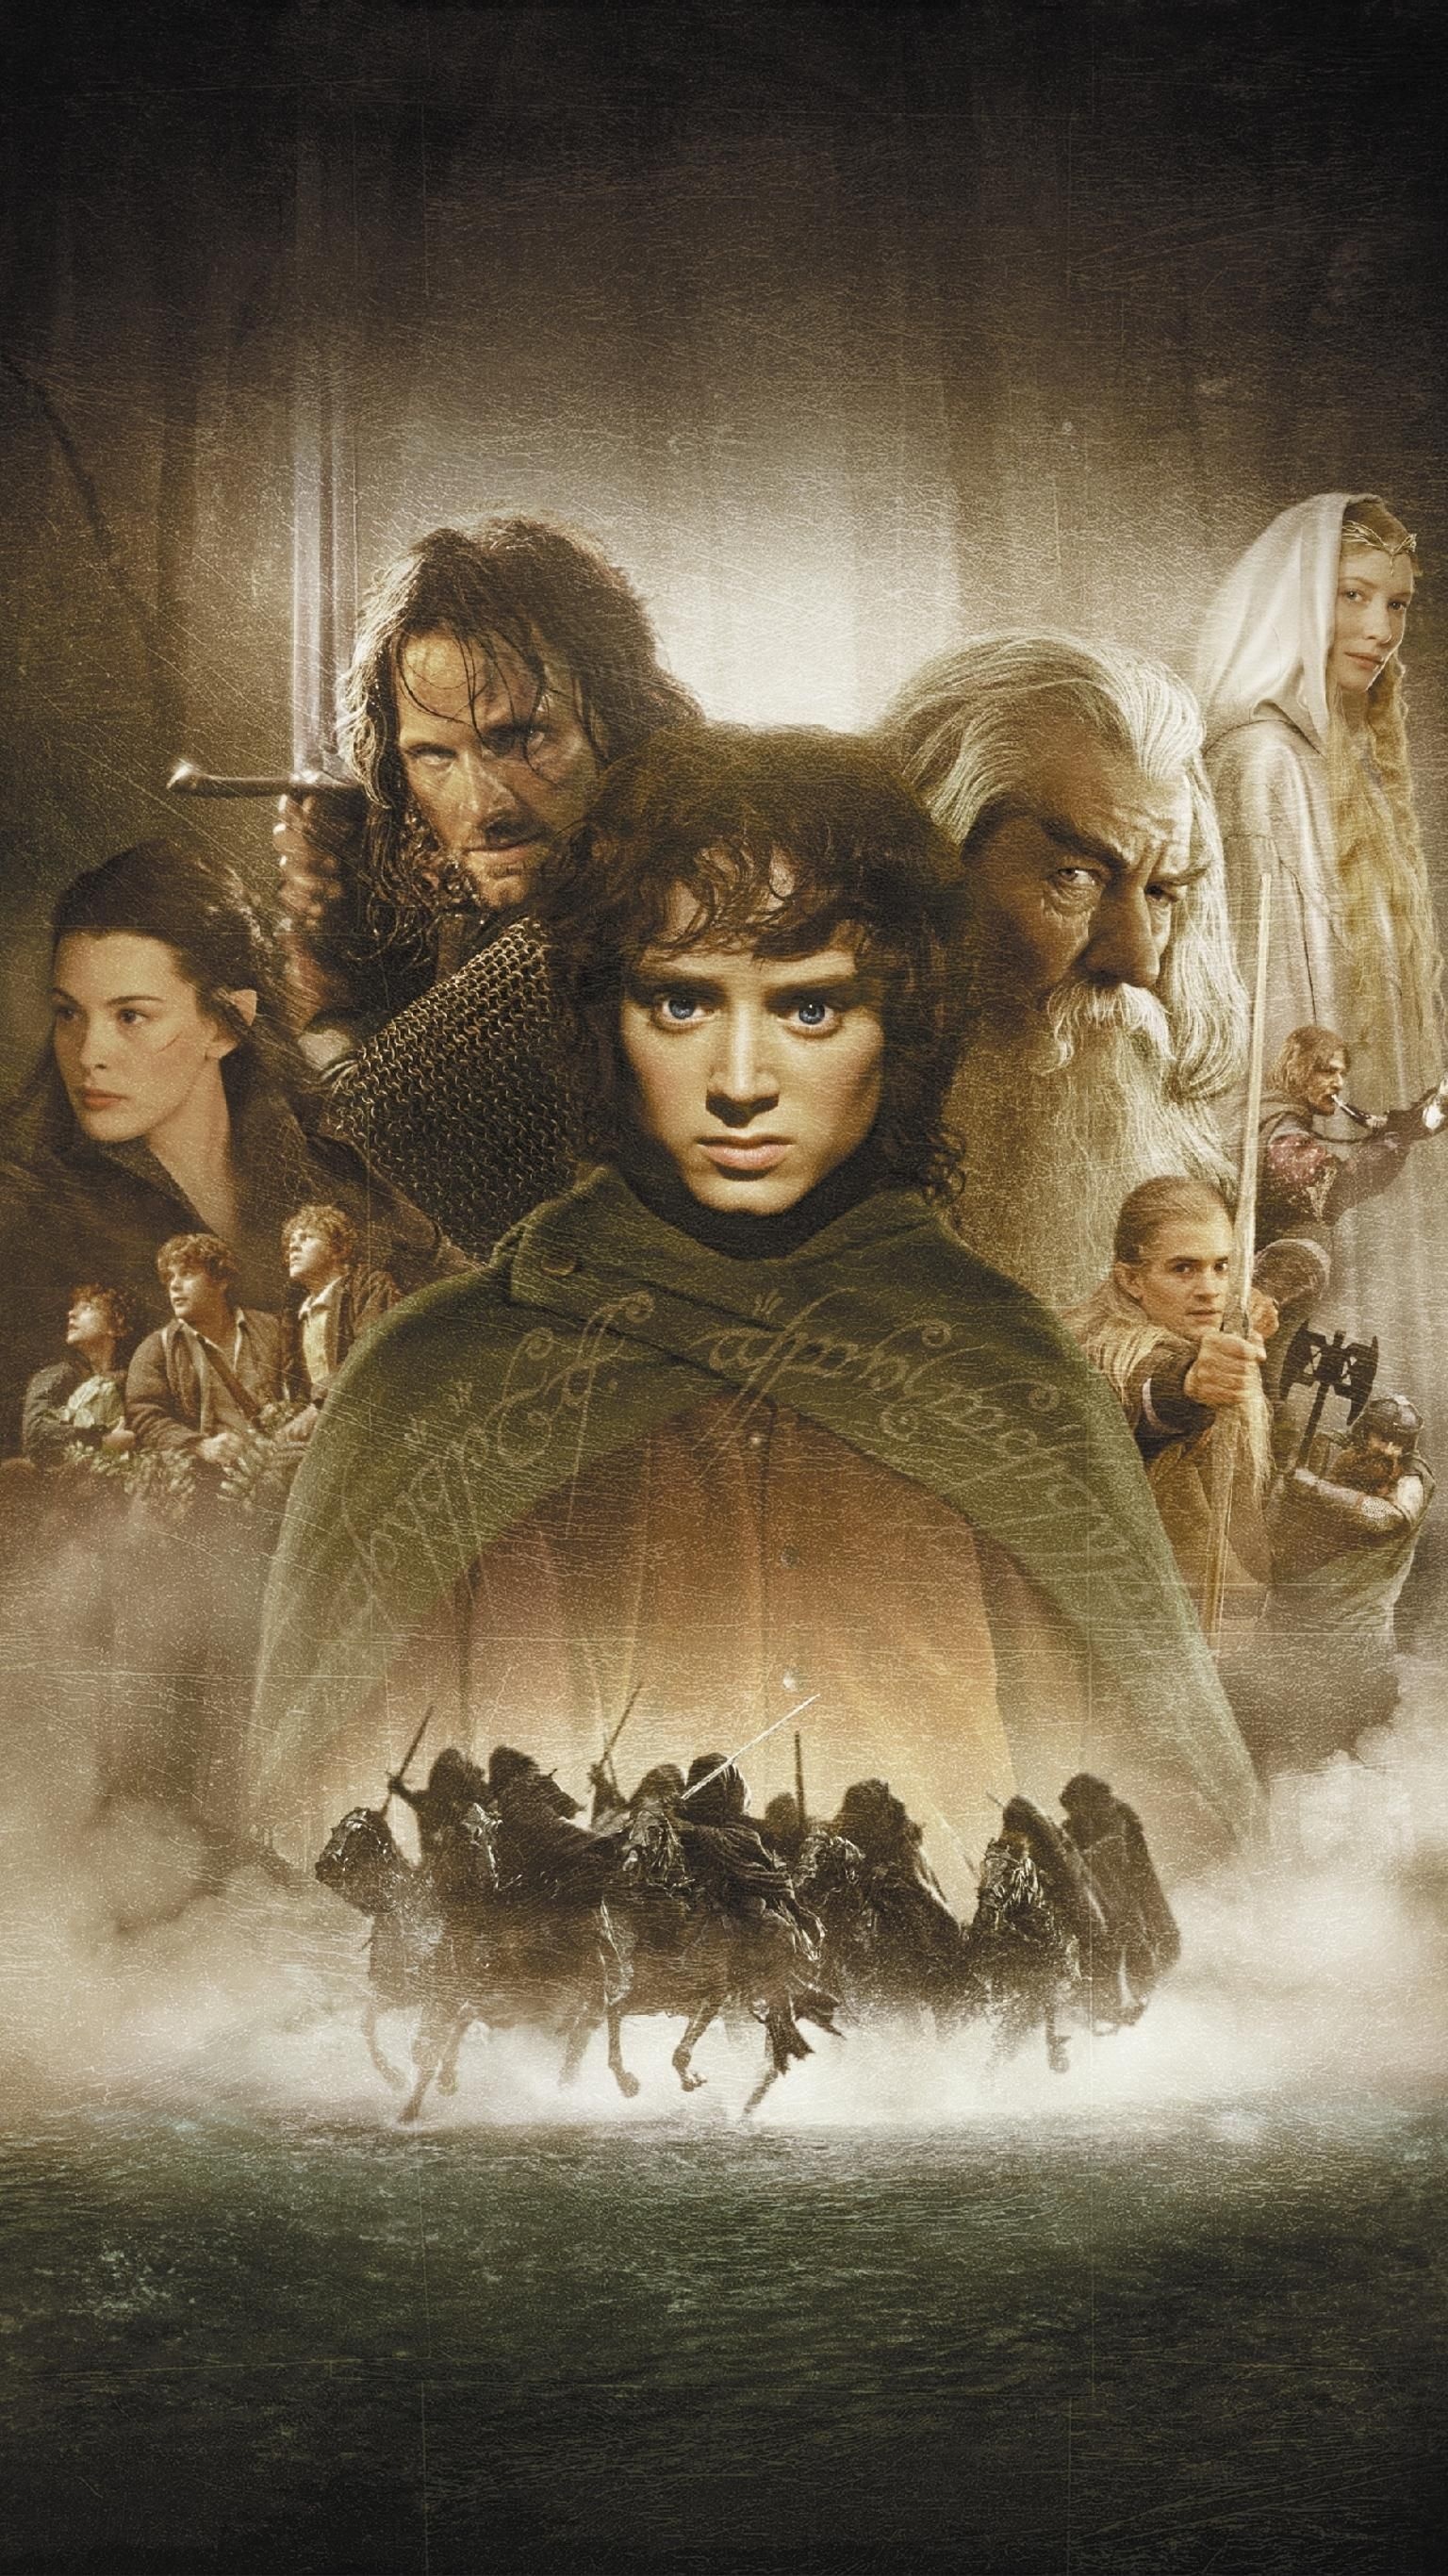 The Lord of the Rings, The Hobbit, Phone wallpapers, Cinematic wonders, 1540x2740 HD Phone